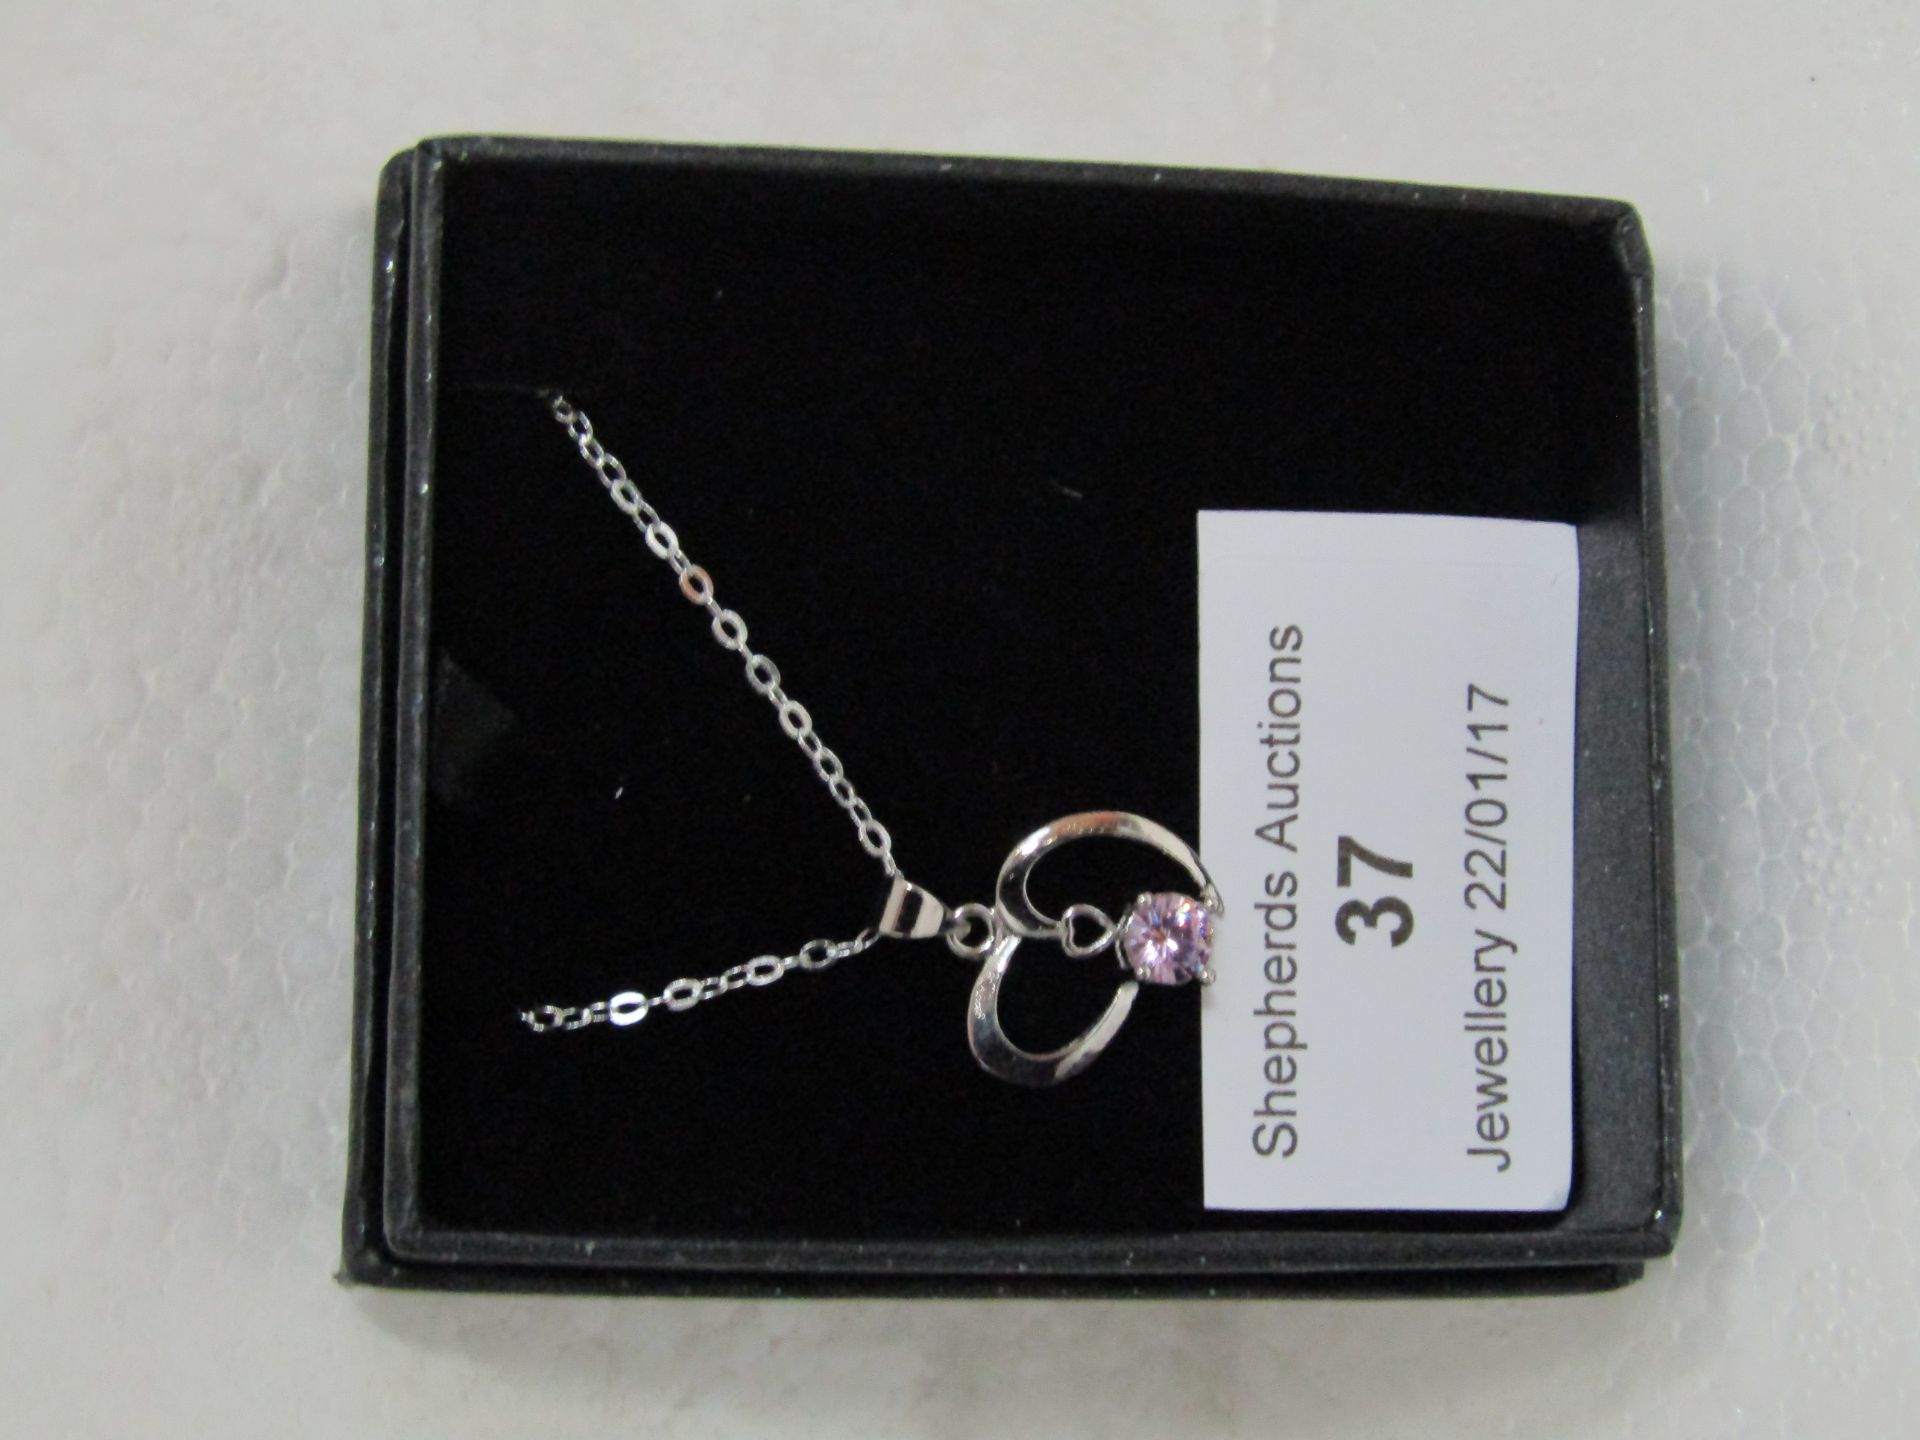 Fifth NYC White Gold Plated Necklace with Swarovski Element Crystal in presentation box